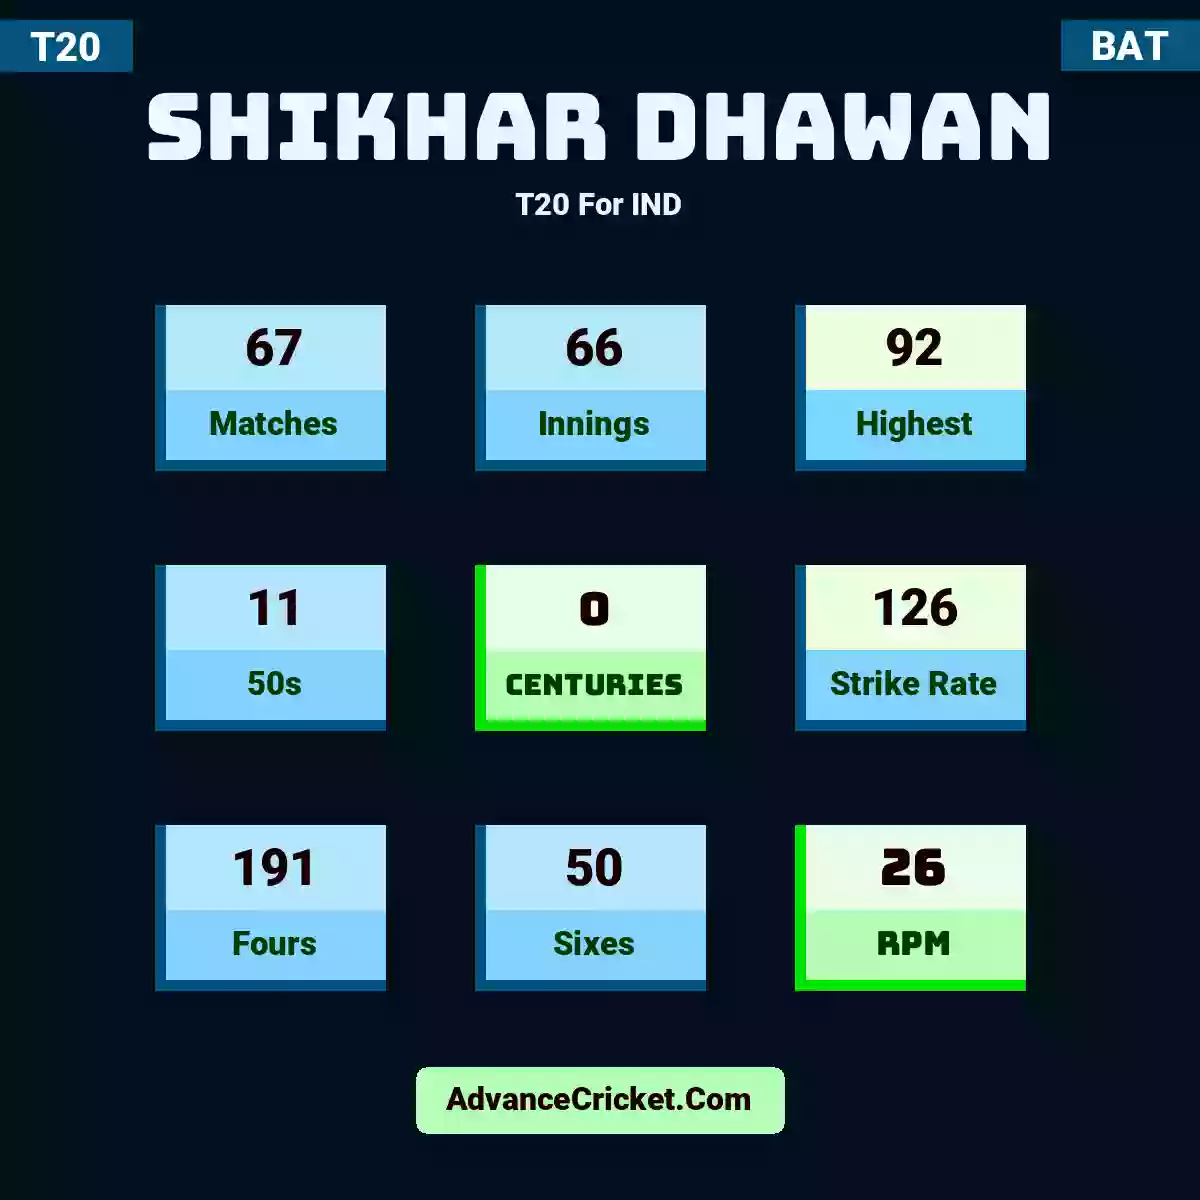 Shikhar Dhawan T20  For IND, Shikhar Dhawan played 67 matches, scored 92 runs as highest, 11 half-centuries, and 0 centuries, with a strike rate of 126. S.Dhawan hit 191 fours and 50 sixes, with an RPM of 26.